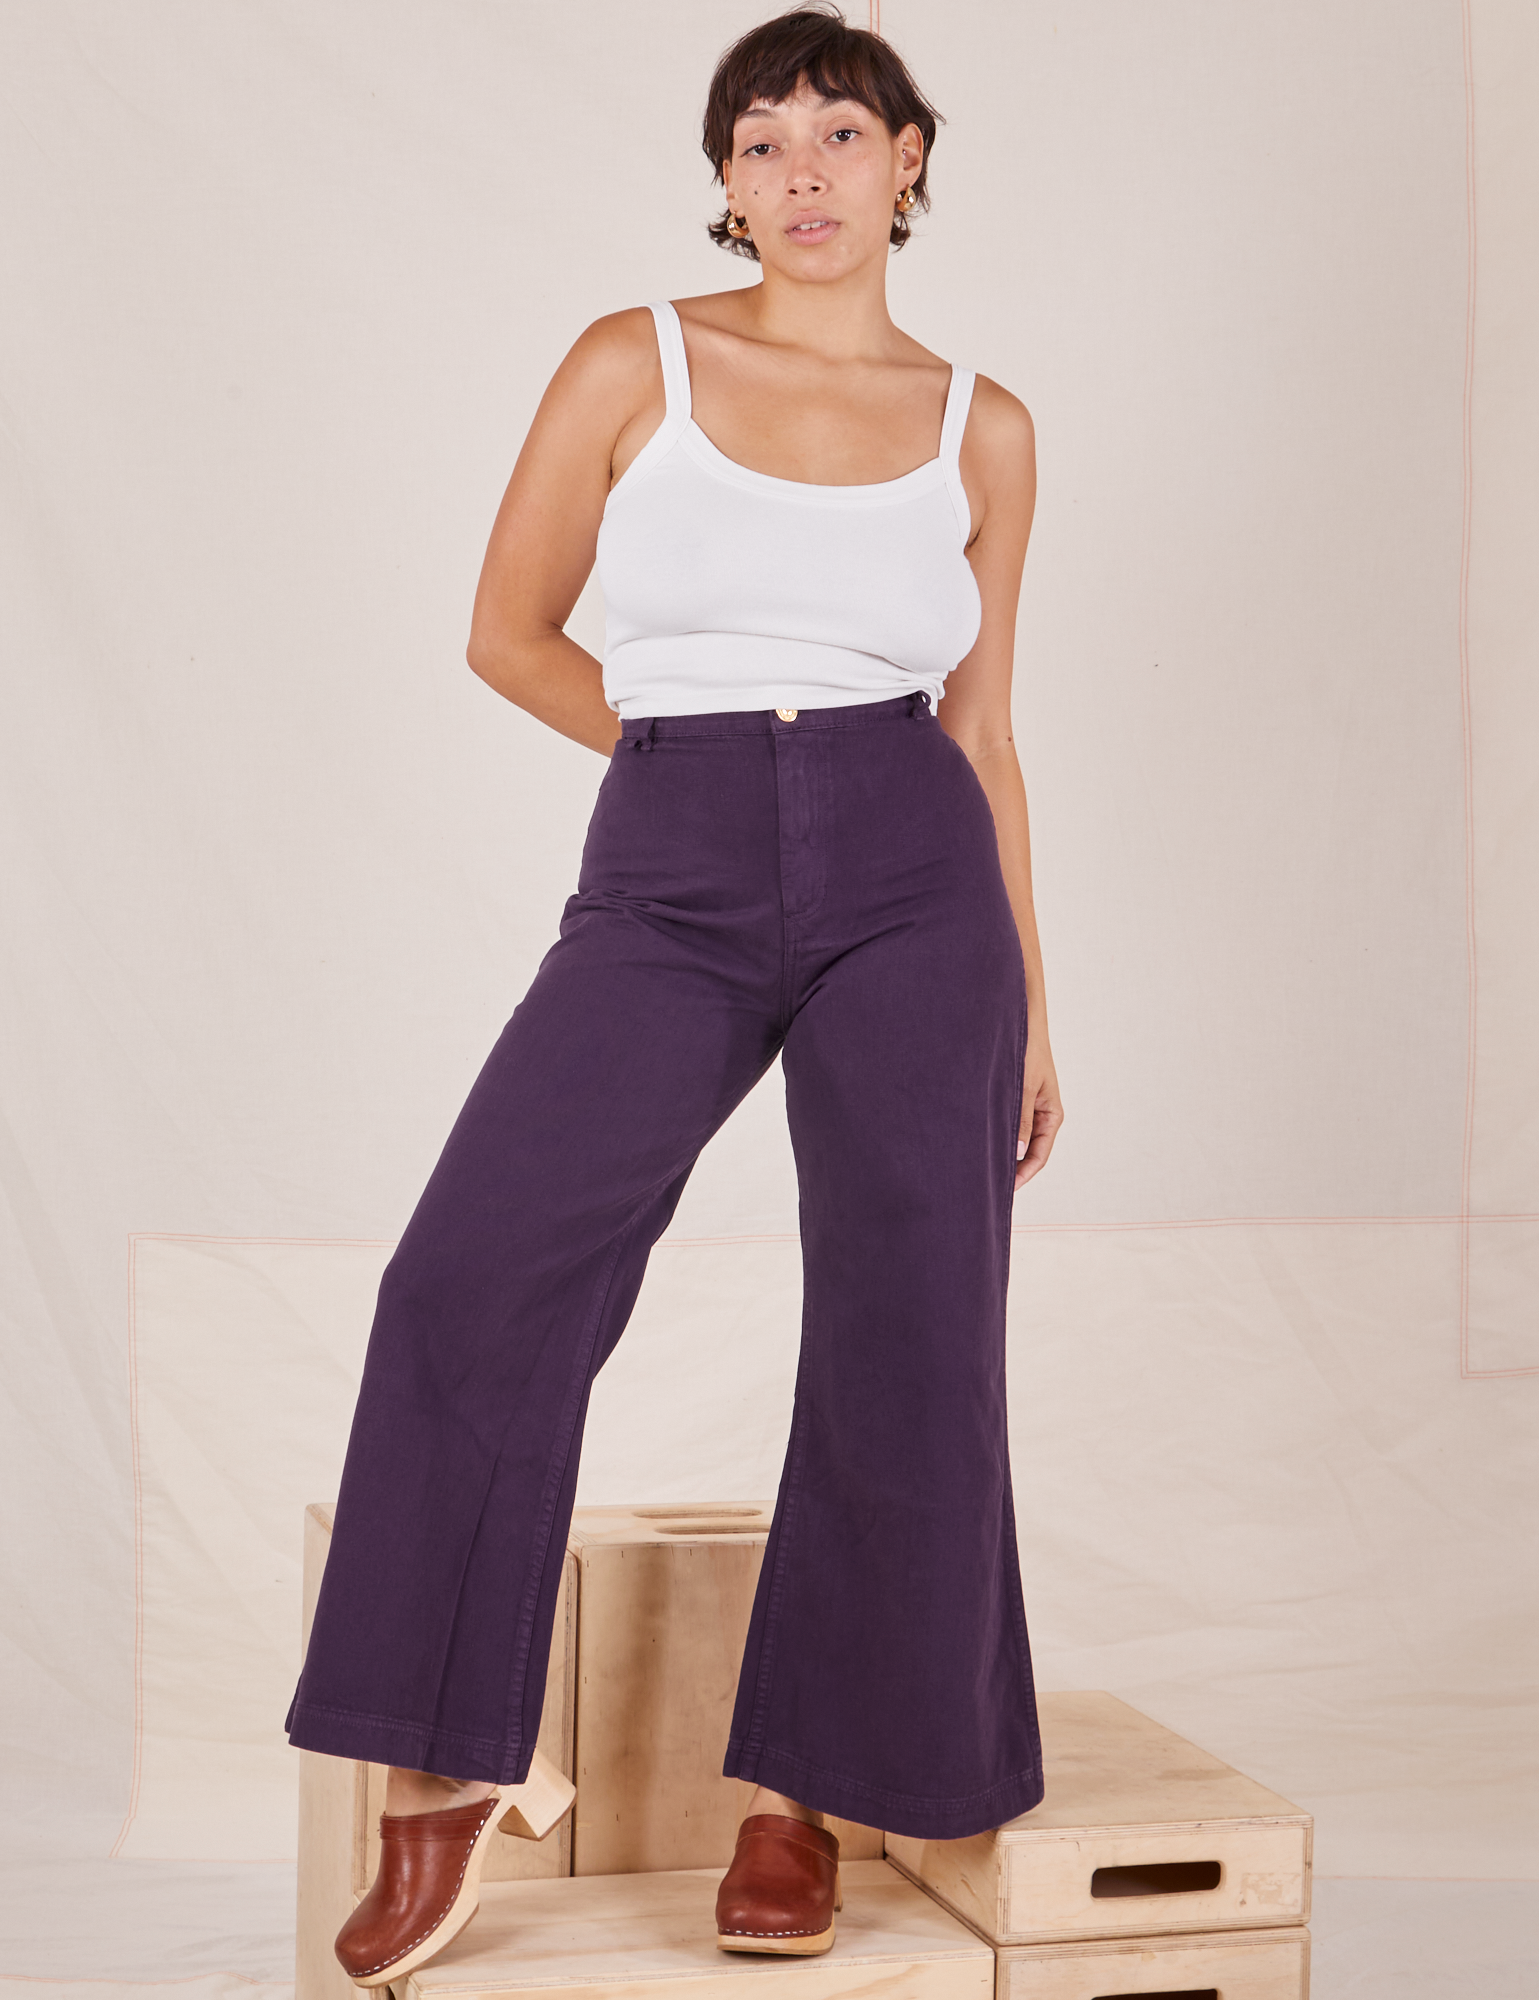 Tiara is 5&#39;4&quot; and wearing XS Bell Bottoms in Nebula Purple paired with vintage off-white Cropped Cami